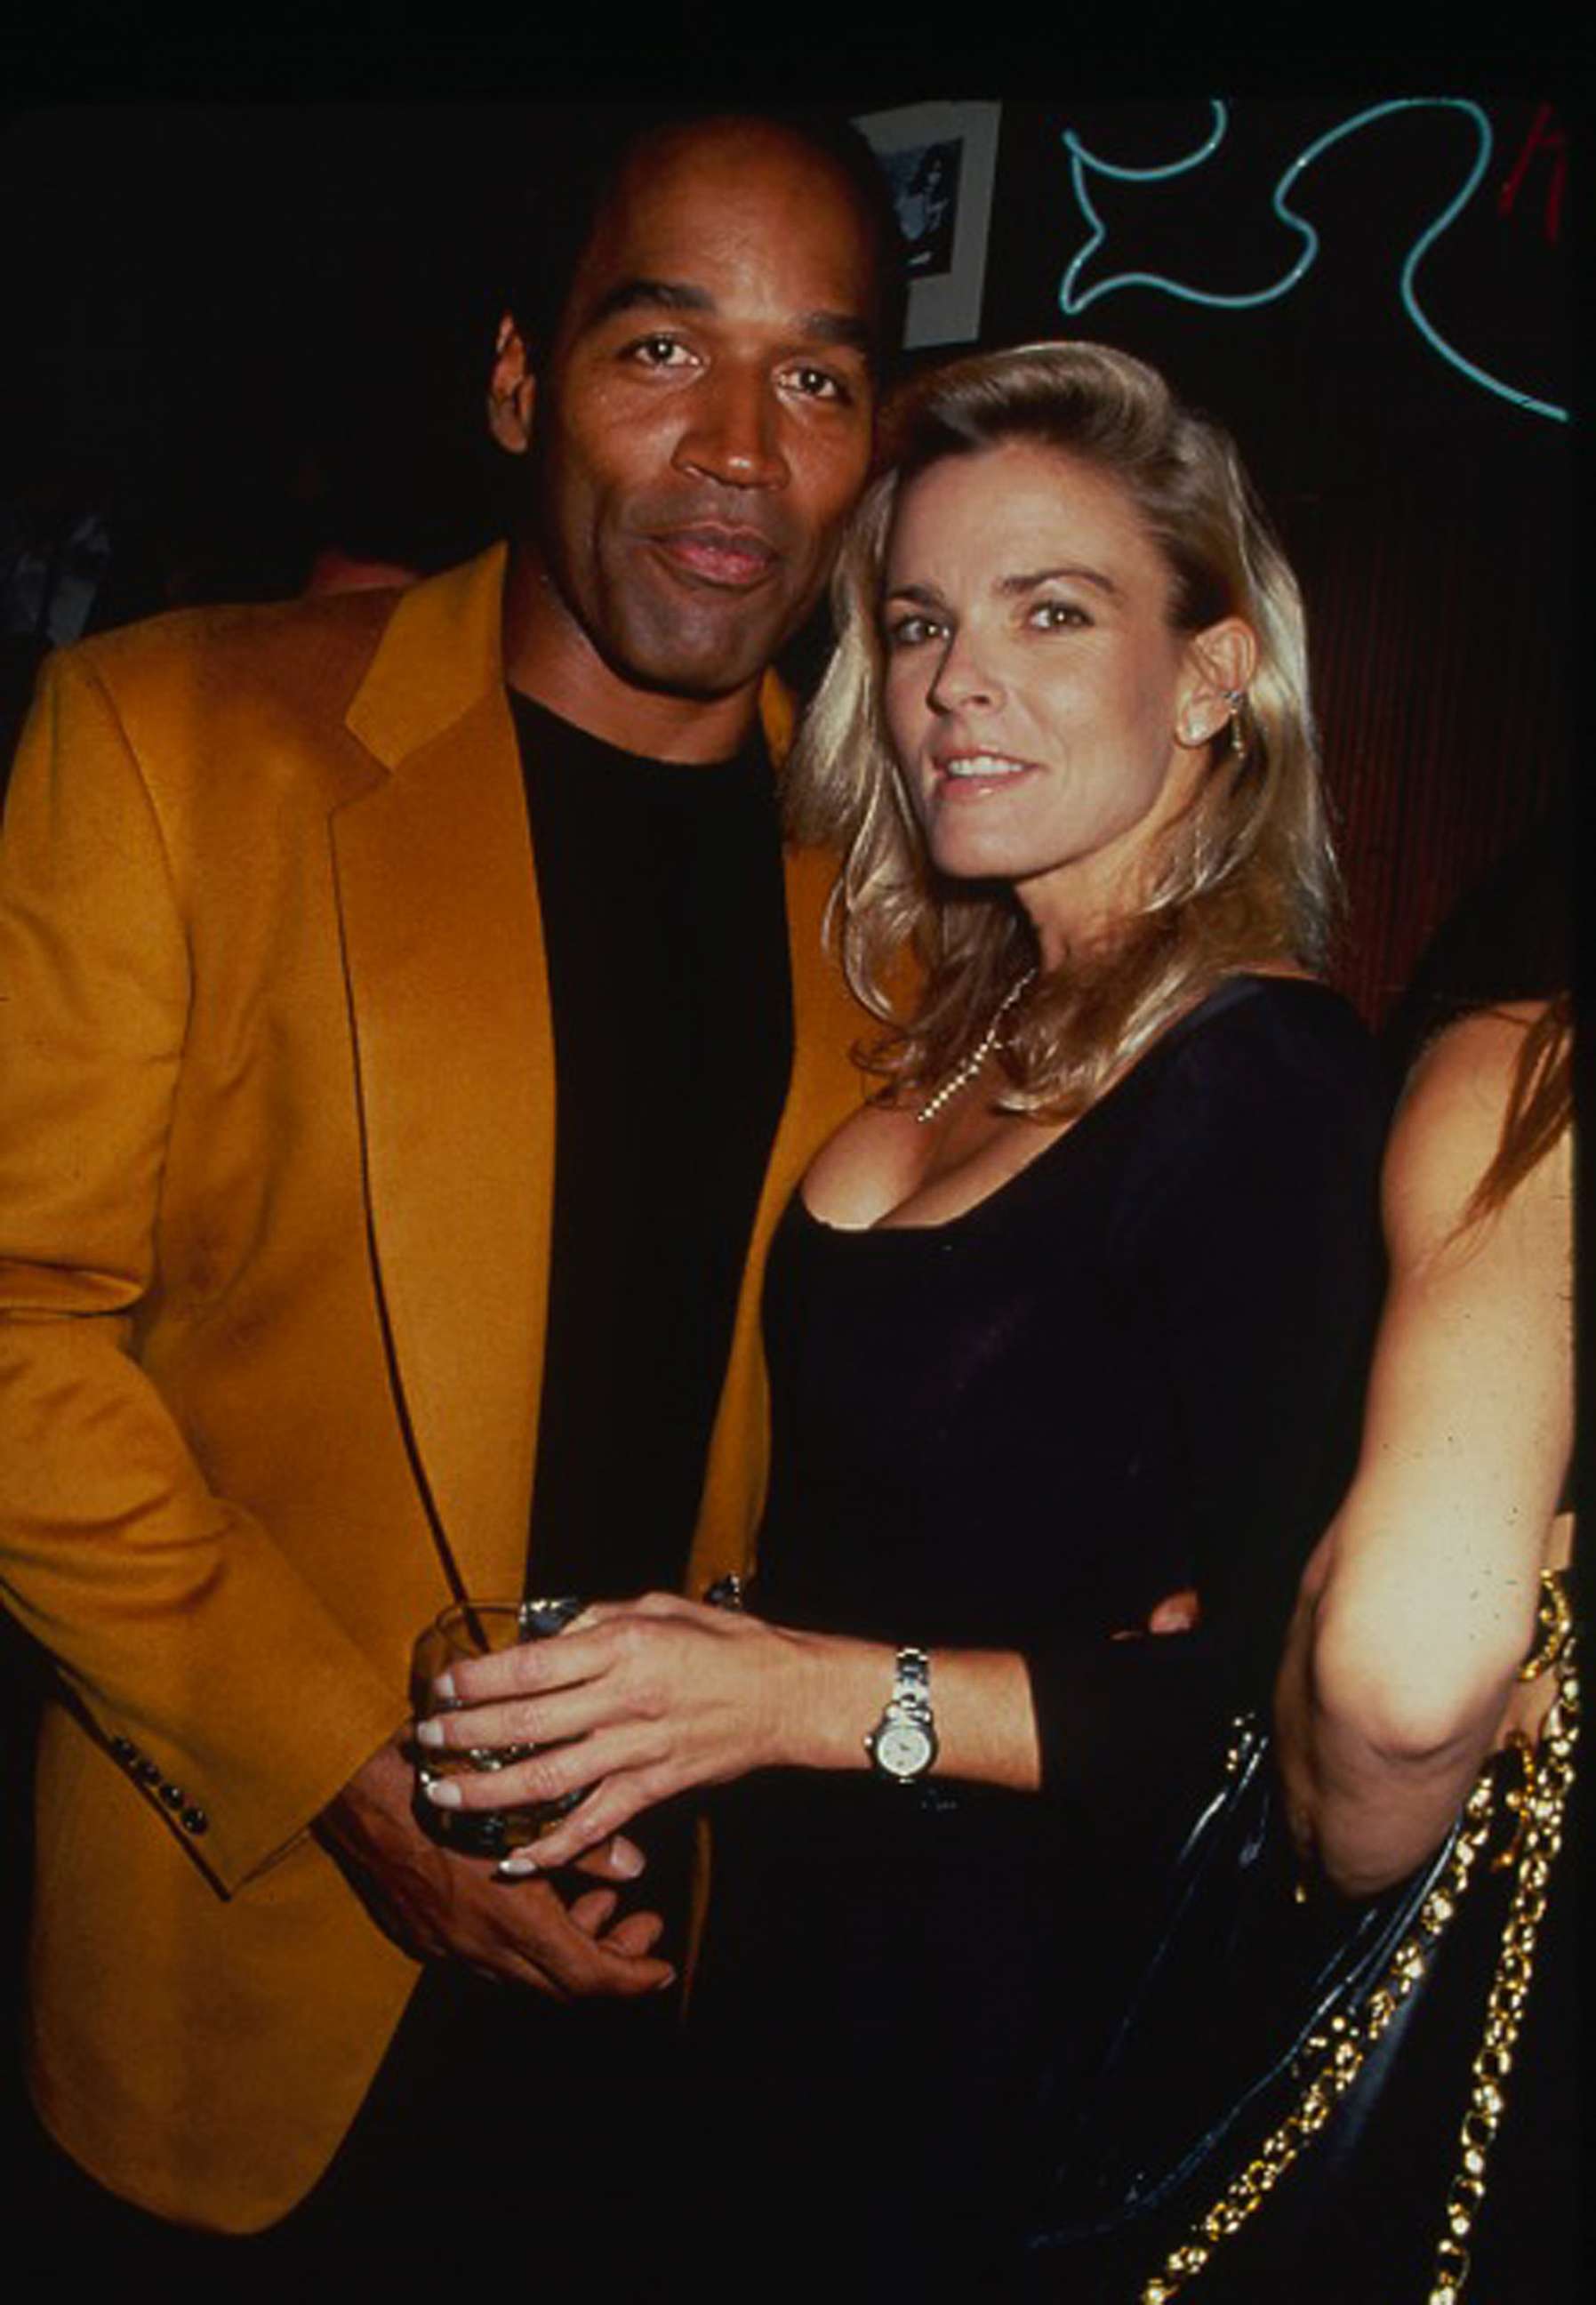 PHOTO: O.J. Simpson and his wife Nicole Brown Simpson attend a party at the Harley Davidson Cafe in New York City, circa 1993.